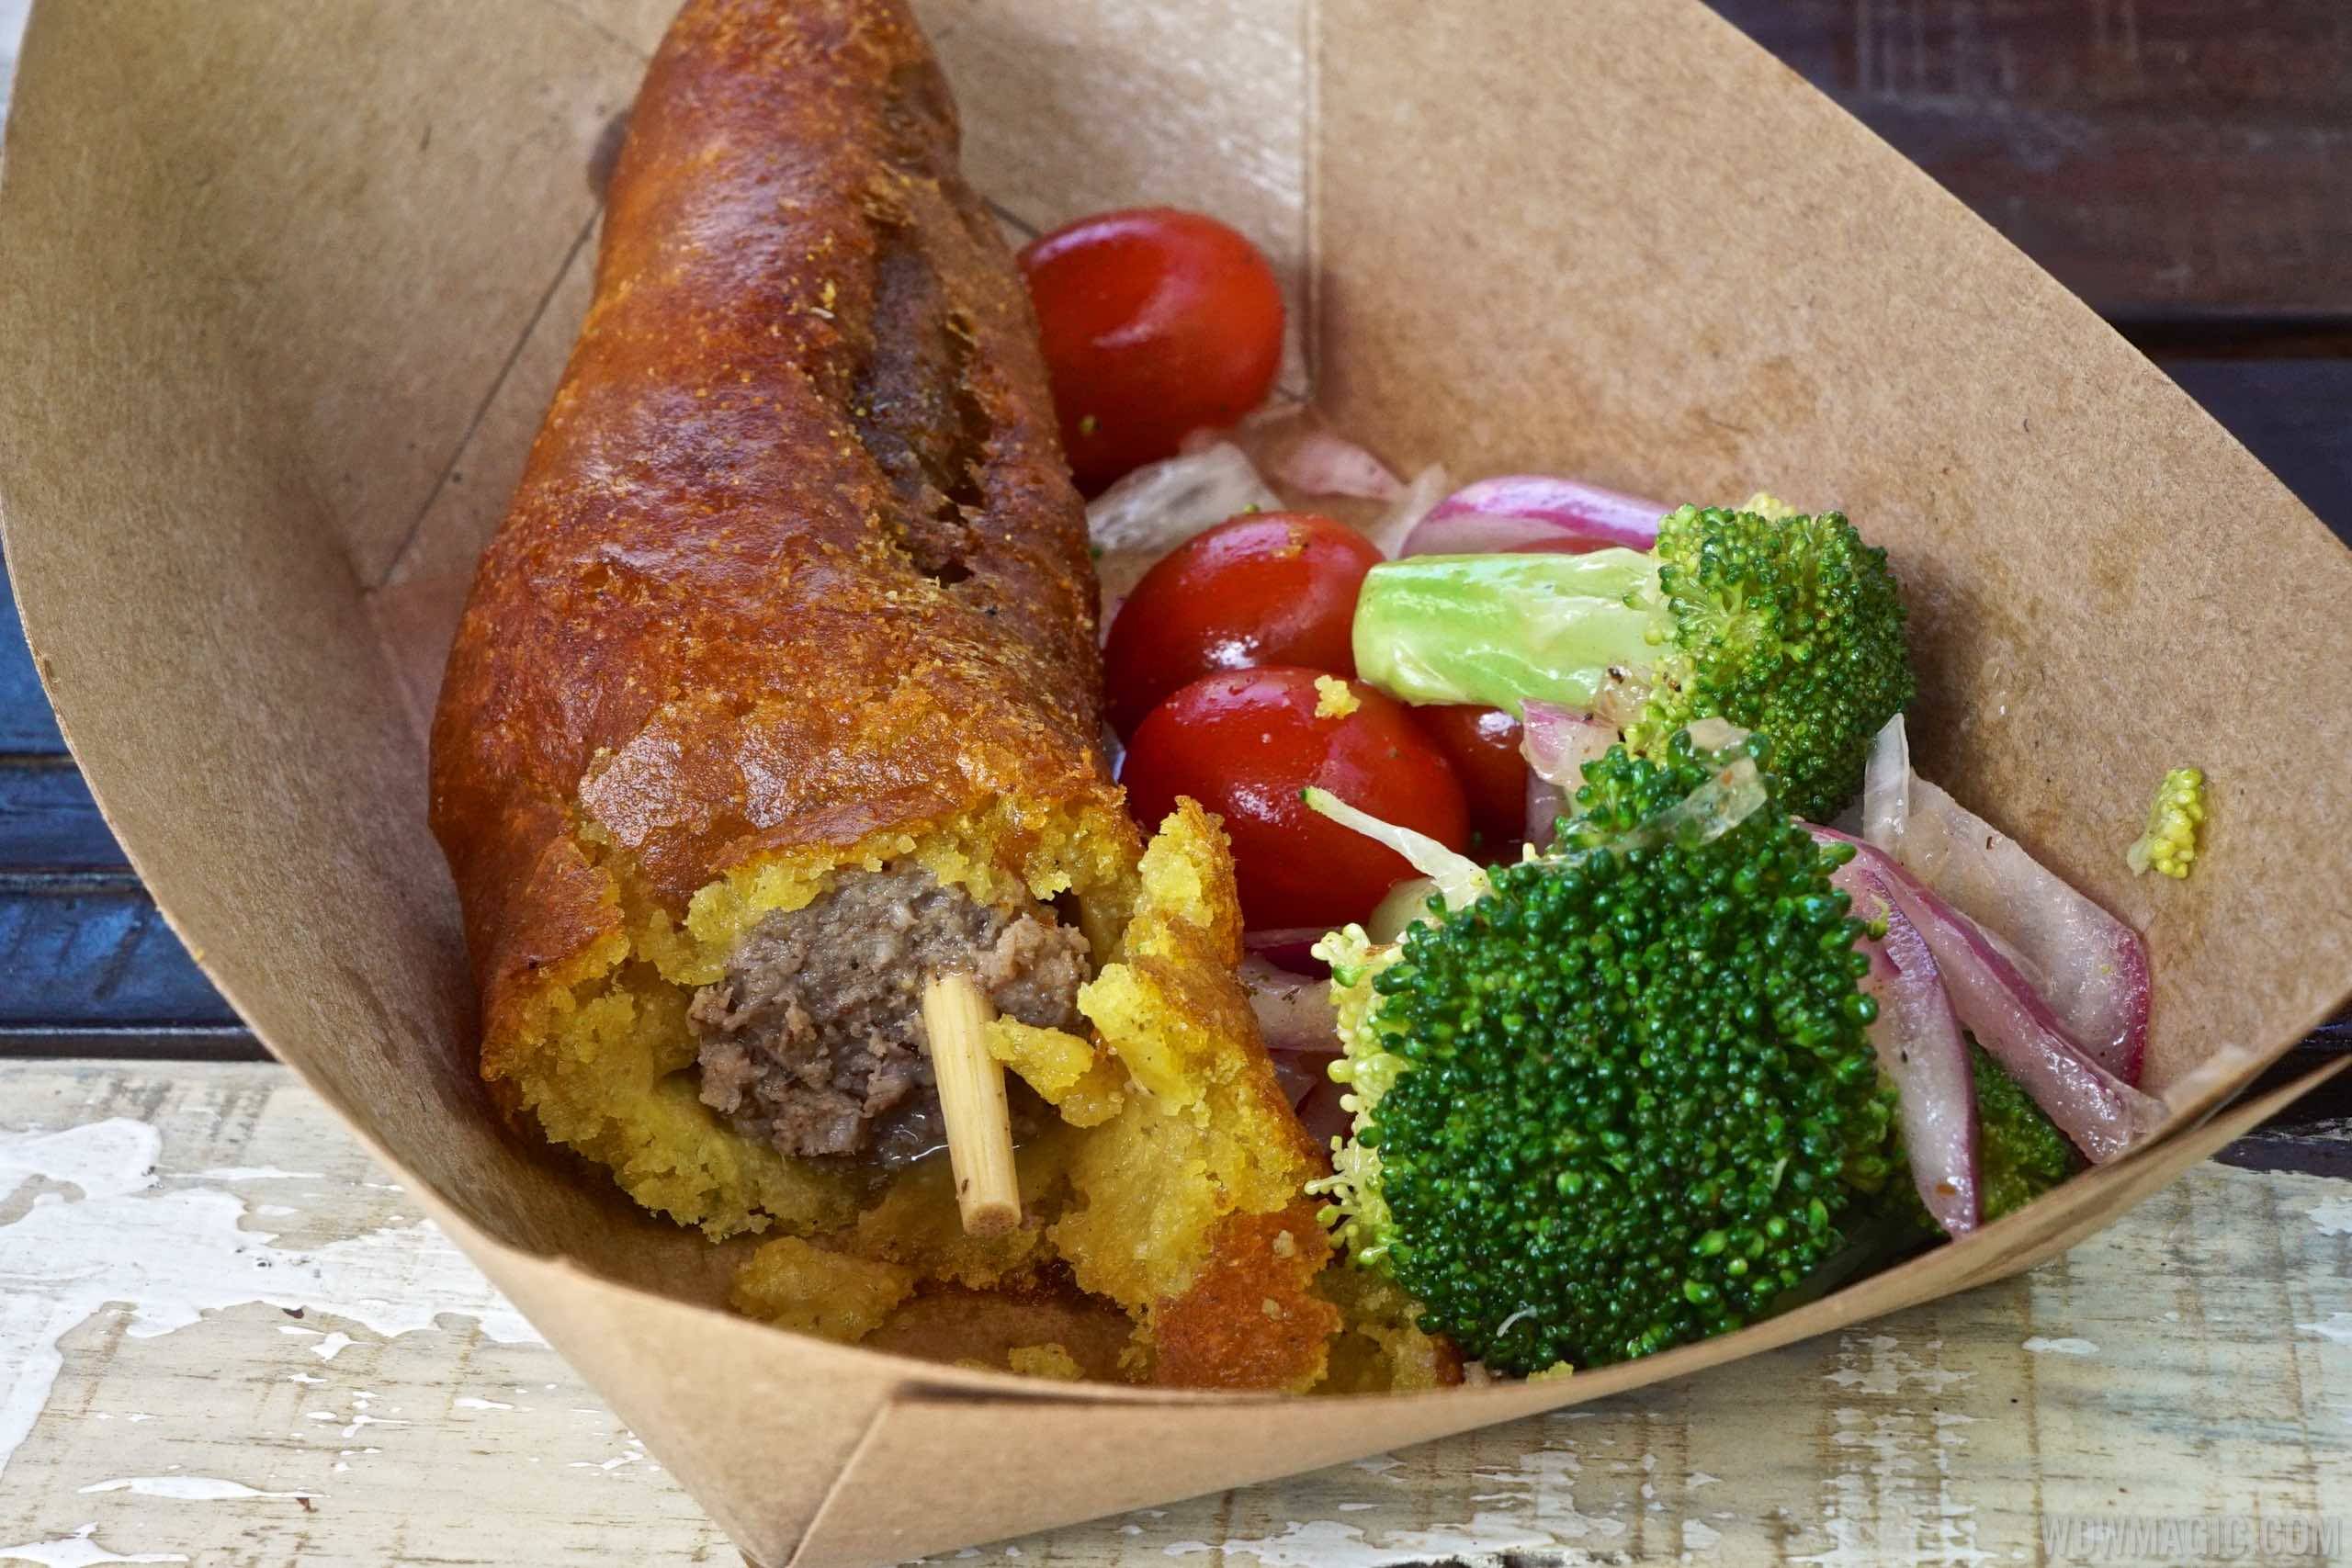 Harambe Market Food - Sausage fried in curried corn batter with roasted broccoli and tomato salad $8.99